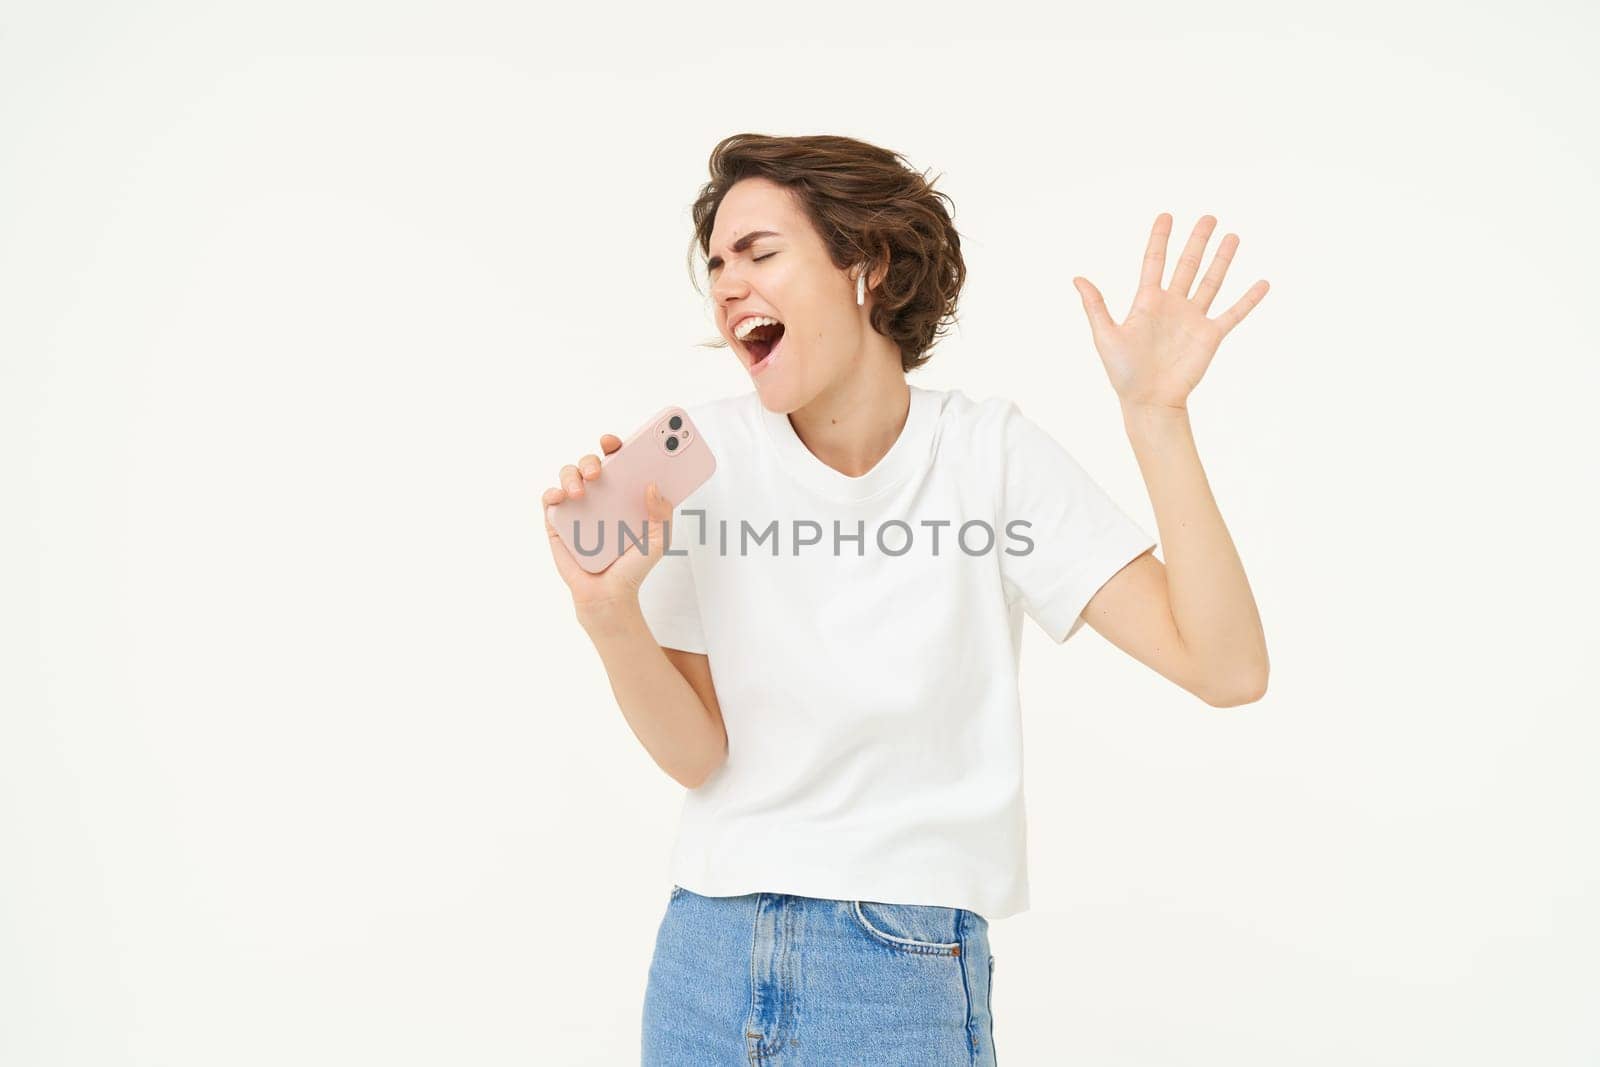 Portrait of happy young woman singing in mobile speakerphone, listening music in wireless headphonse, playing smartphone karaoke game, standing over white background.